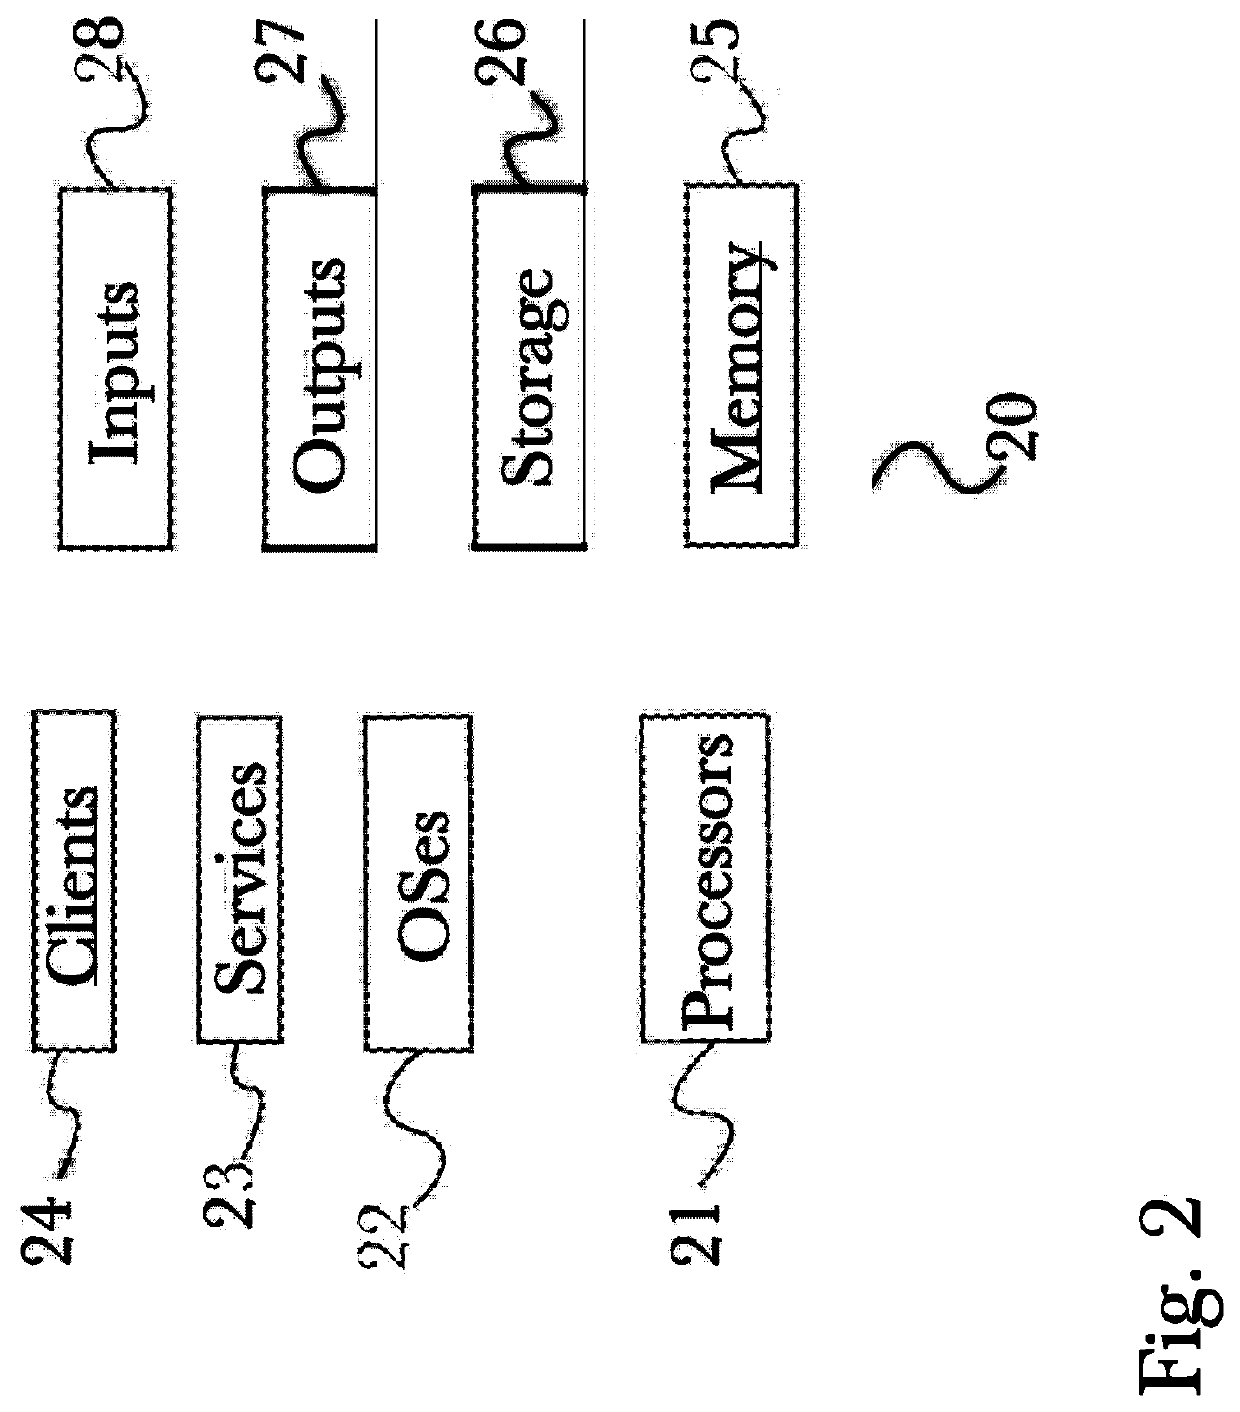 System and method for network implemented cannabis delivery and driver release of funds